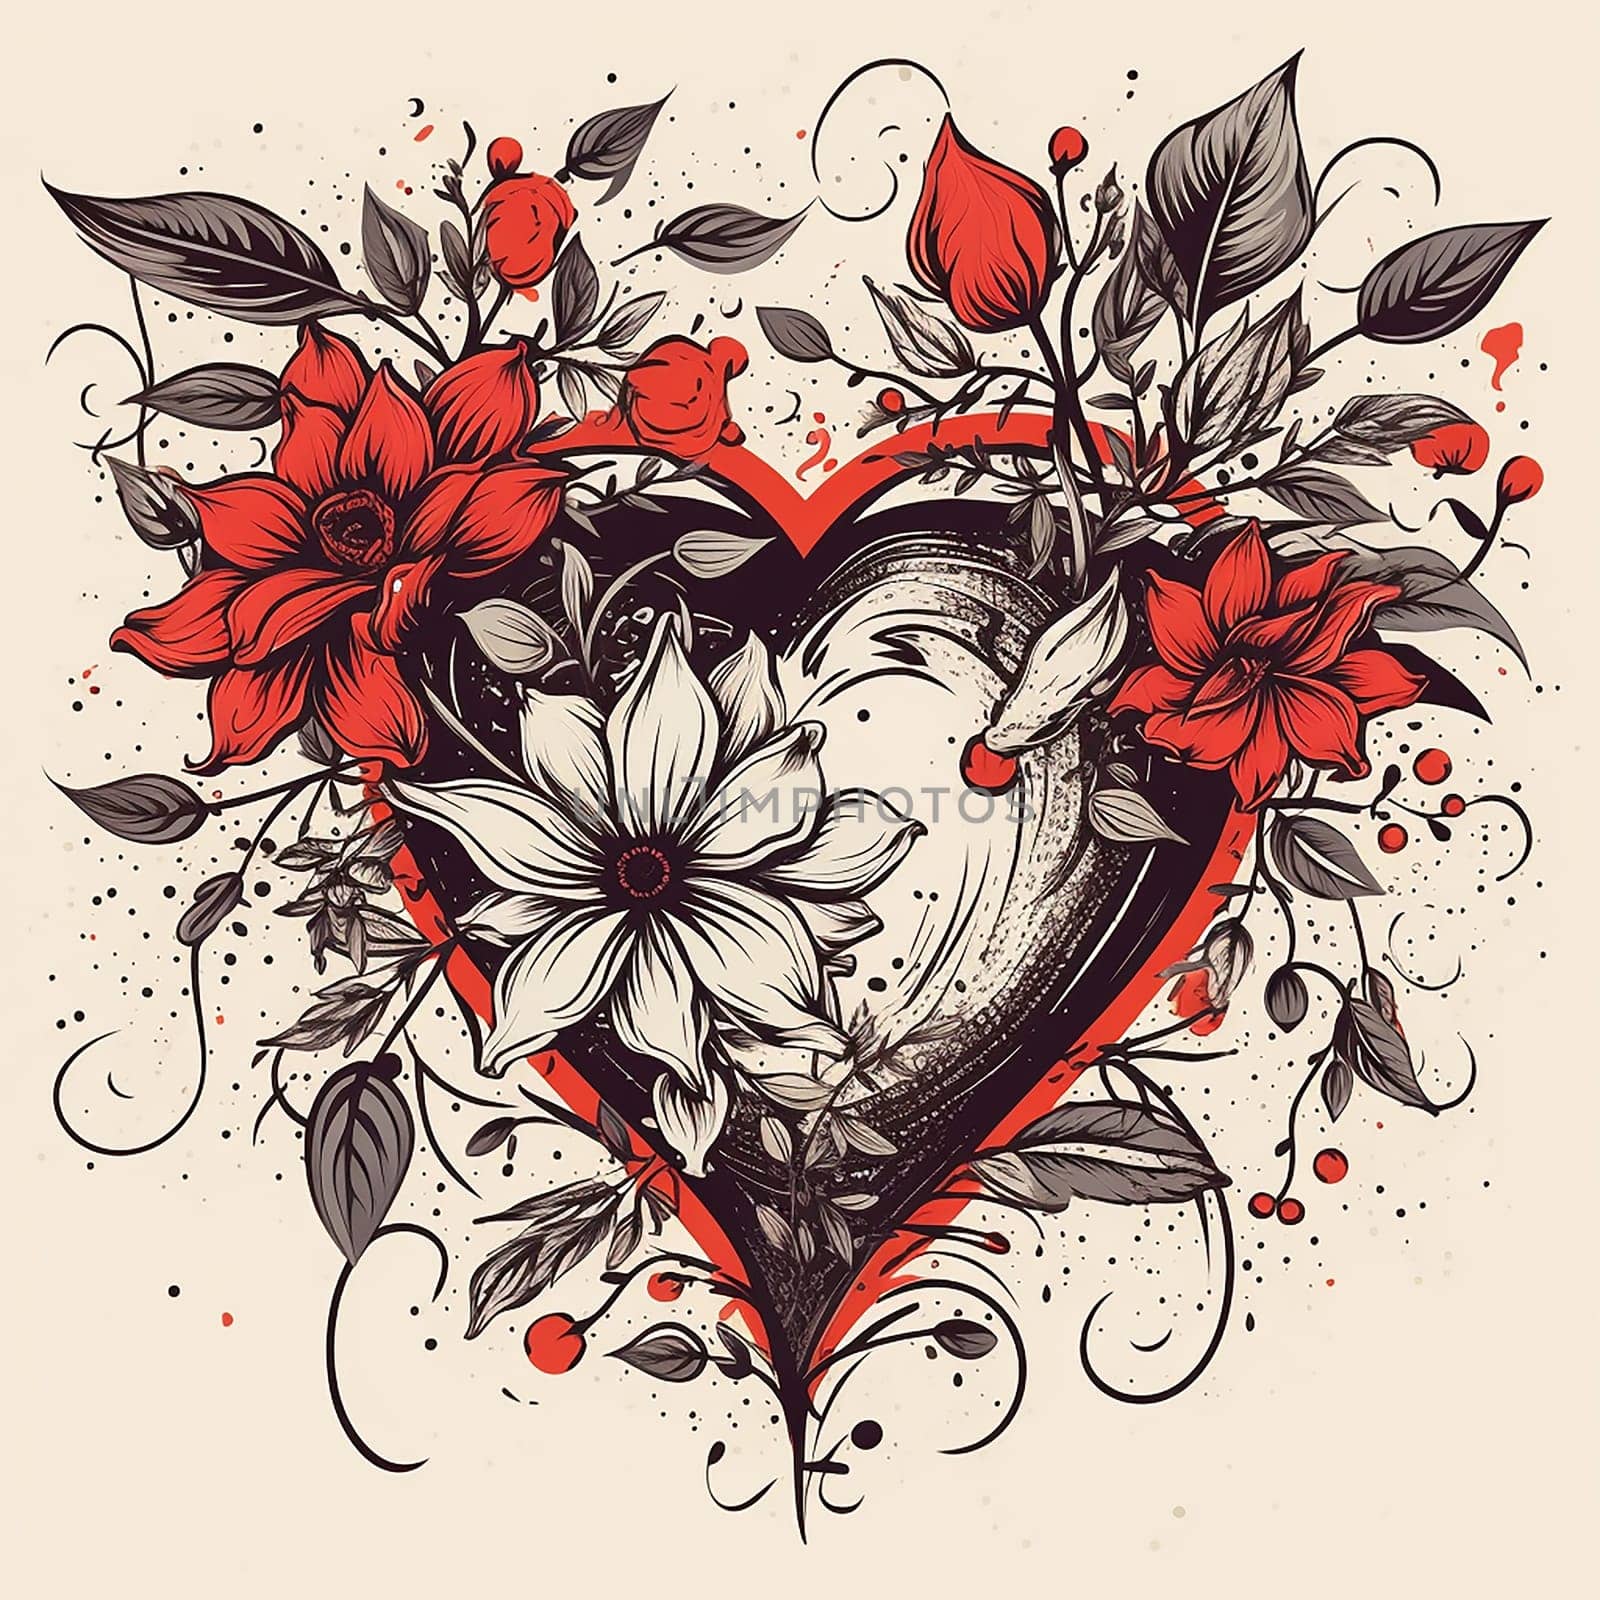 Illustration of a heart surrounded by flowers and leaves with splashes of color.